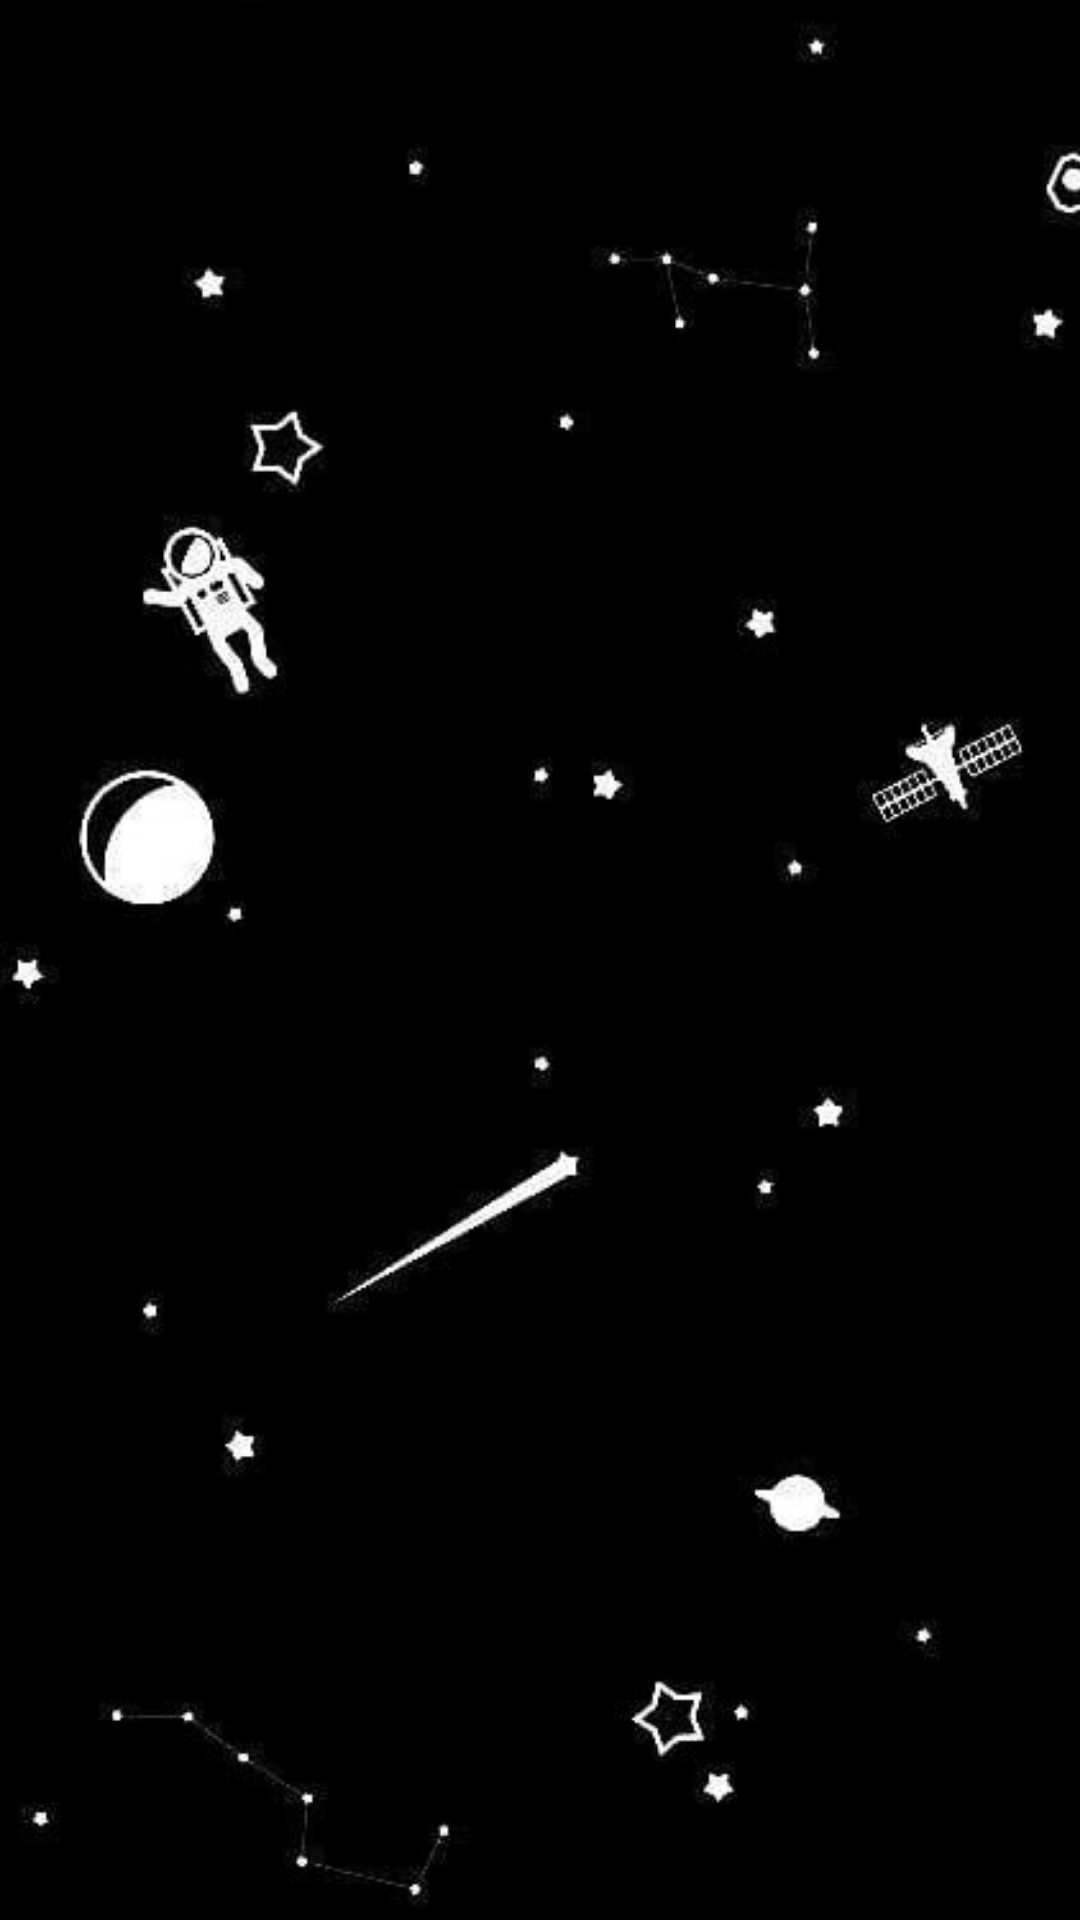 A black and white space scene with a rocket, astronaut, planets, shooting star, and stars. - Black, black rose, dark phone, black phone, simple, couple